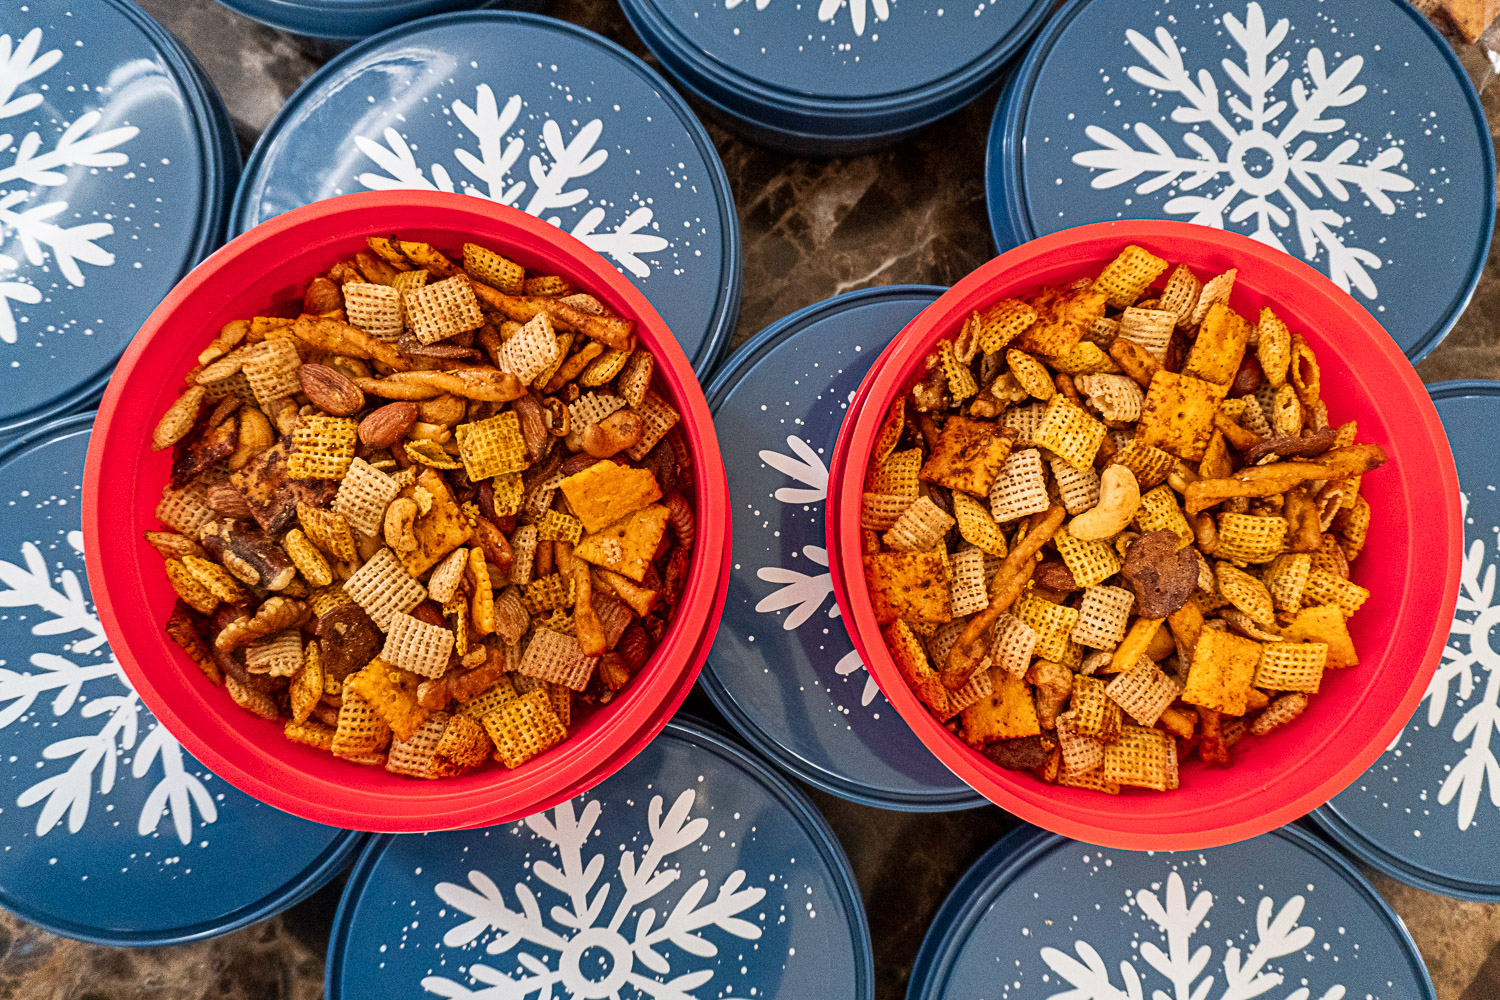 Smoked chex mix in brightly colored containers for gifting.